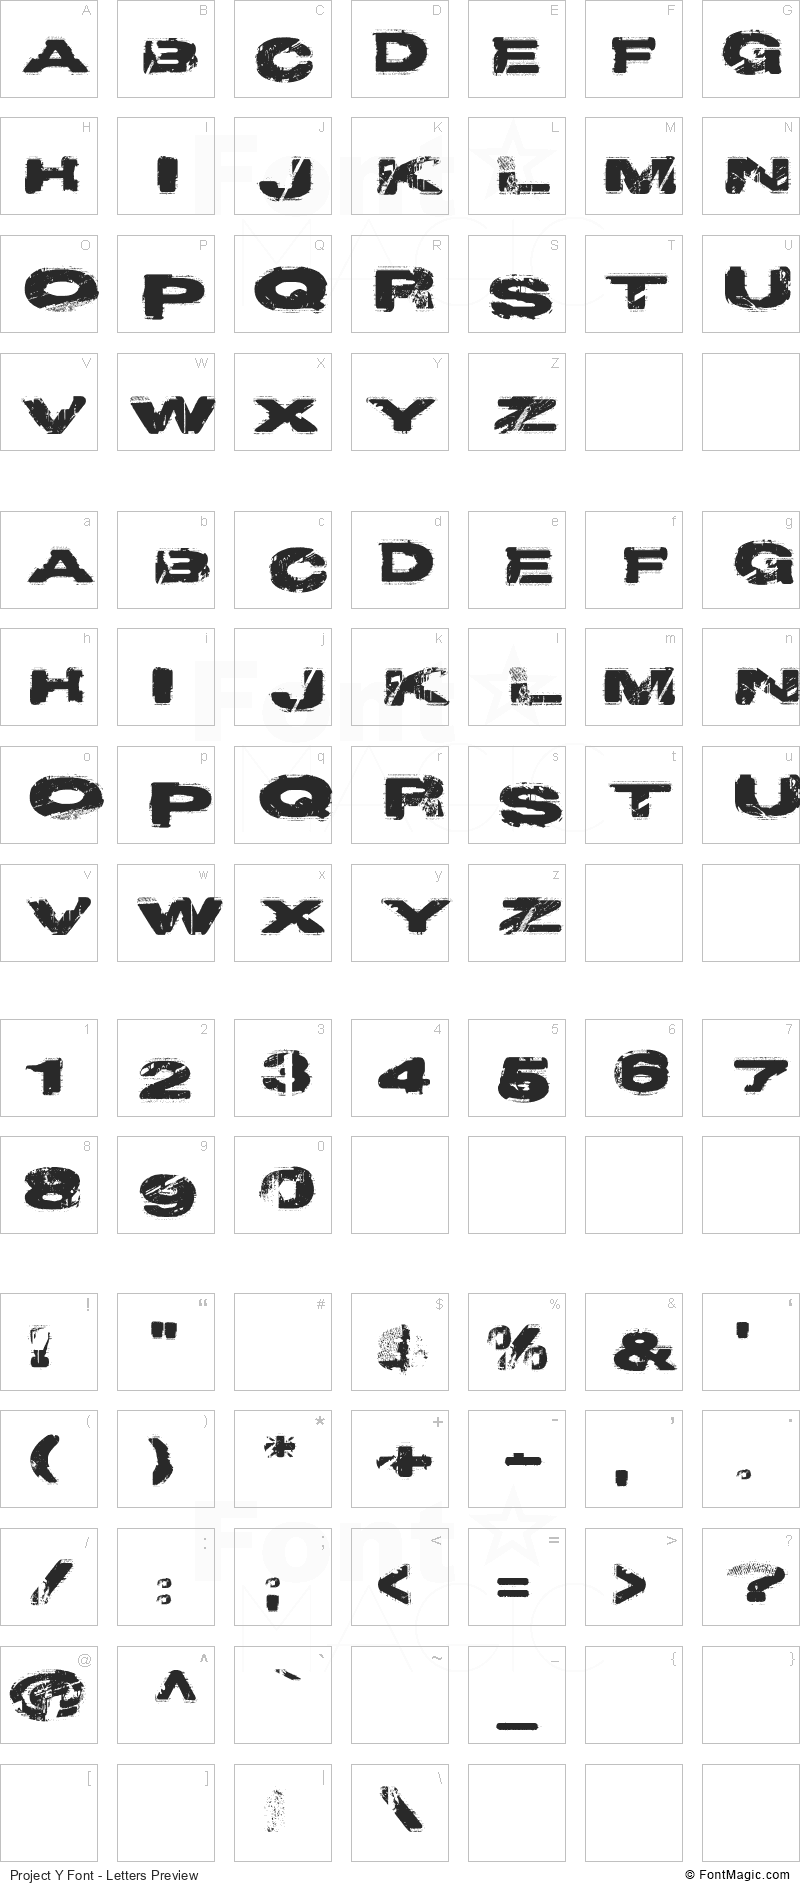 Project Y Font - All Latters Preview Chart